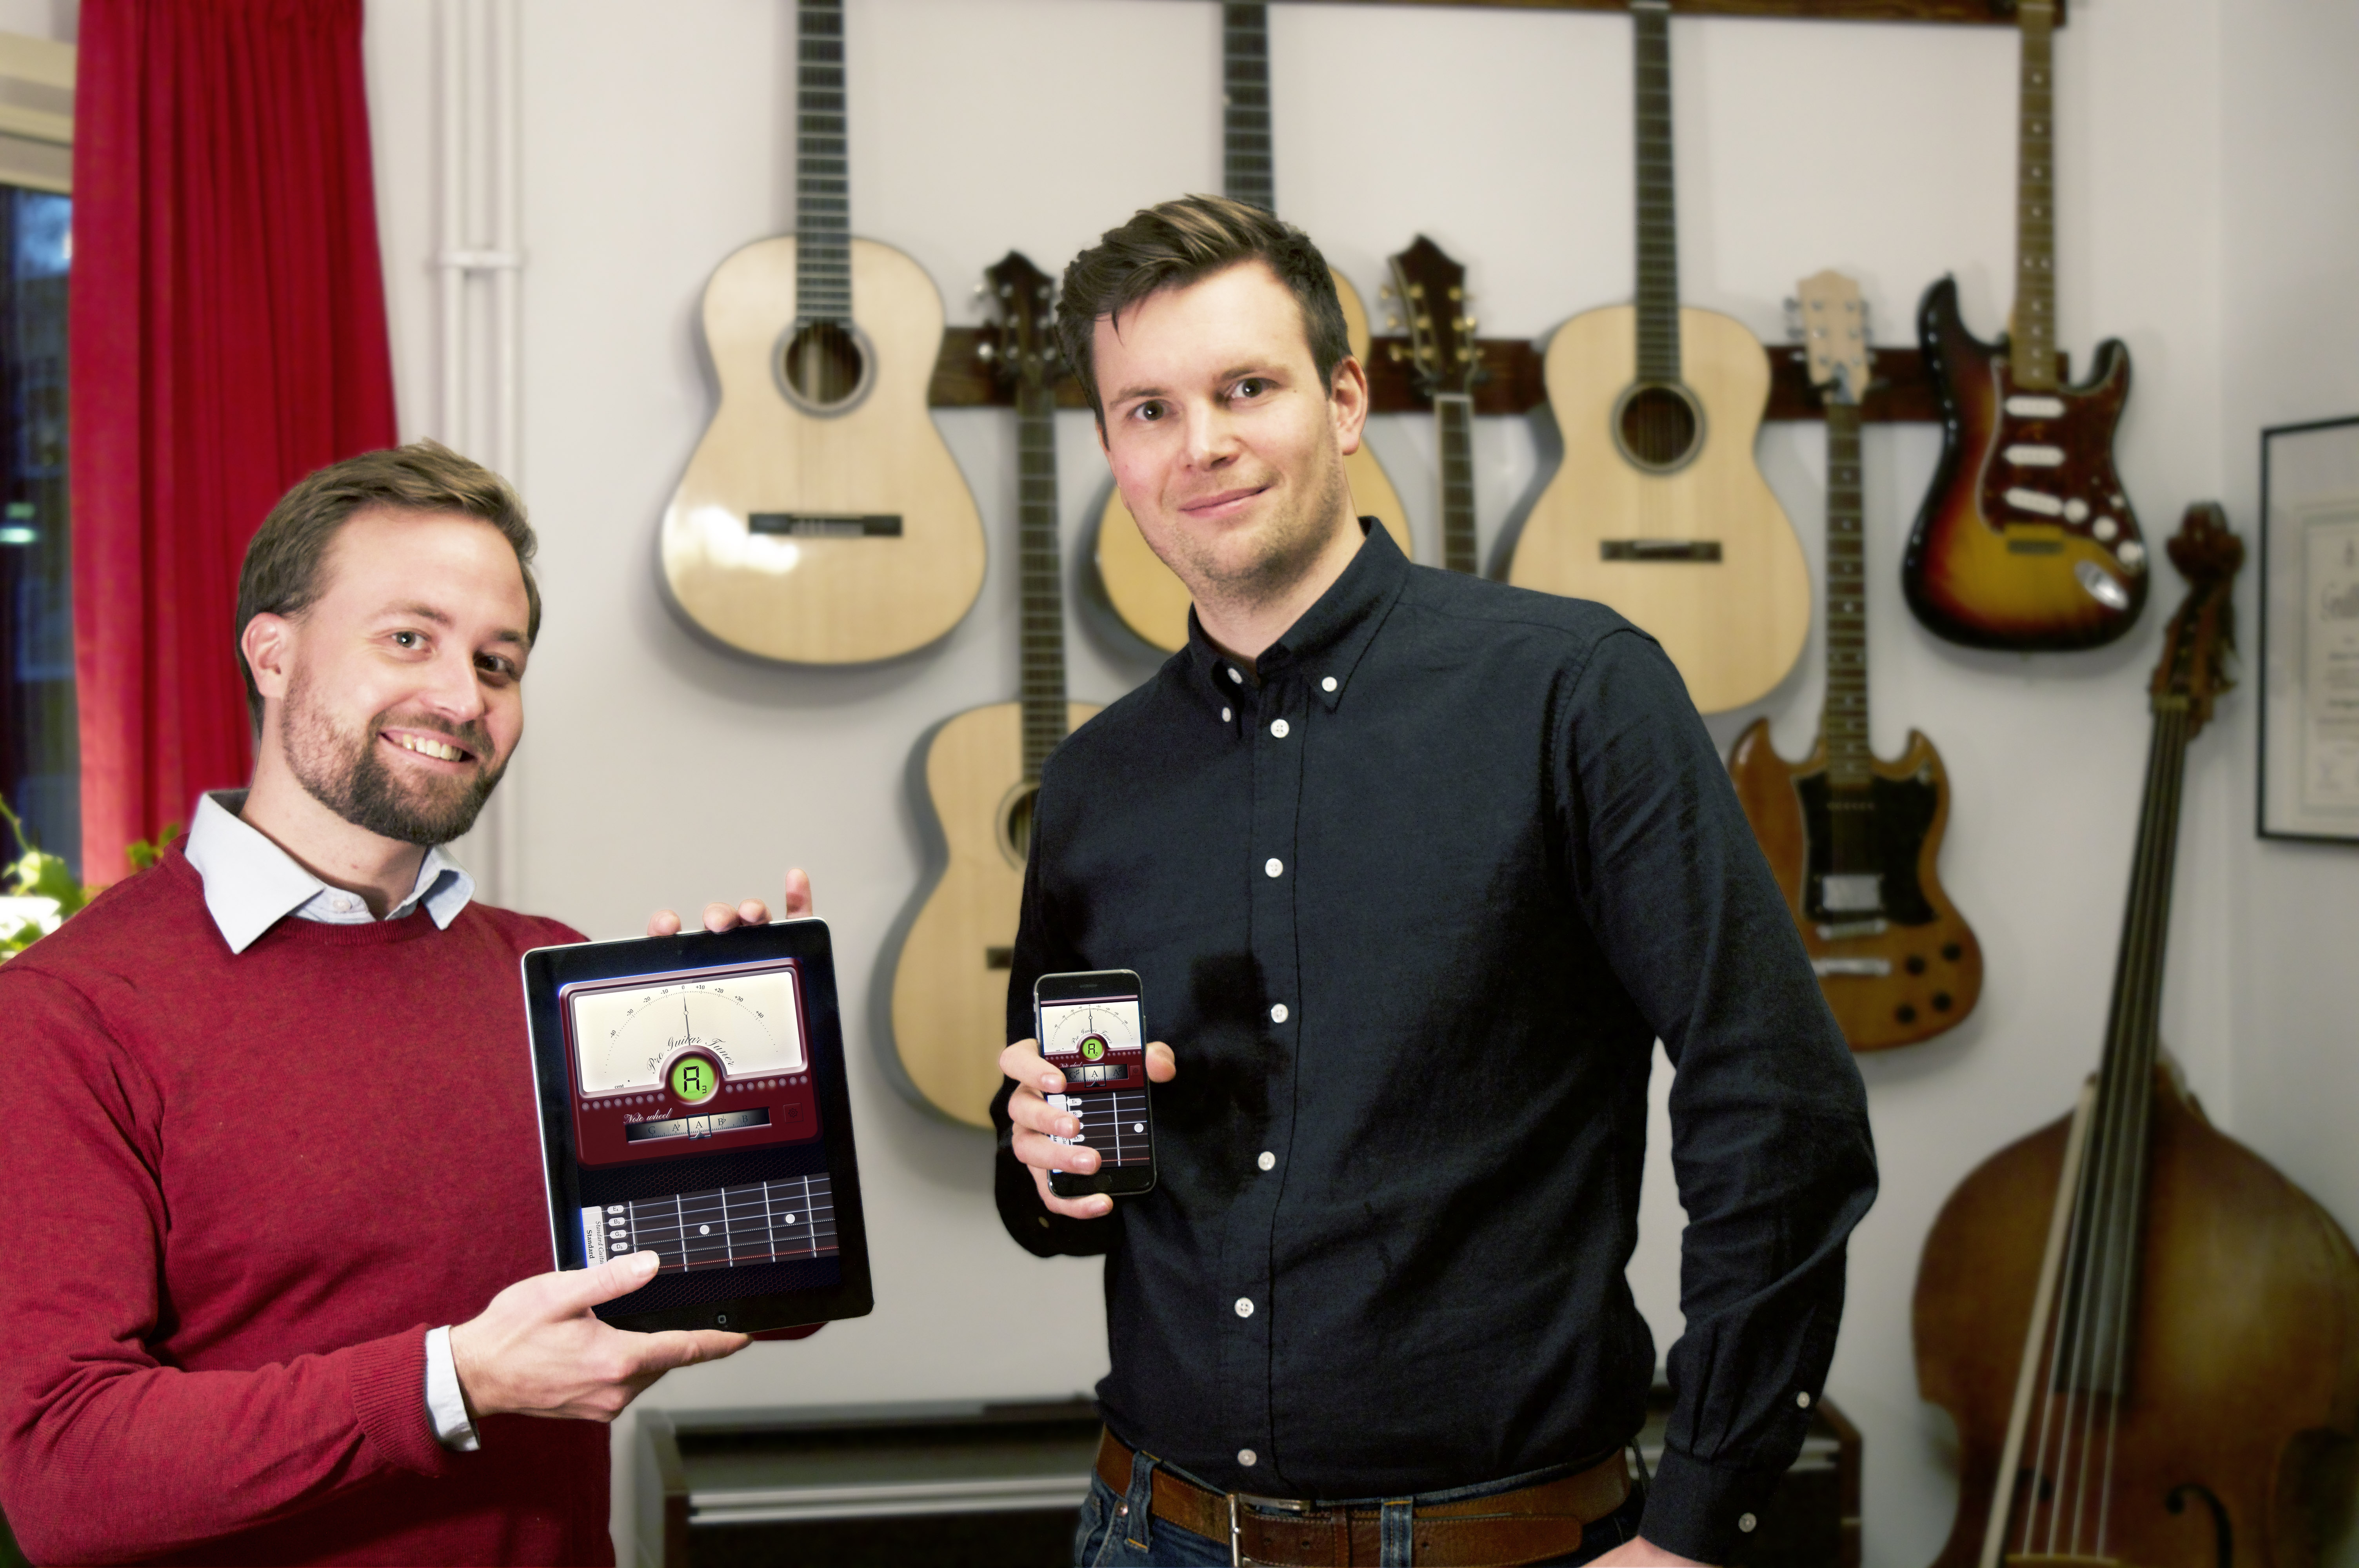 The Pro Guitar co-founders Johannes Larsson and Rickard Östergård